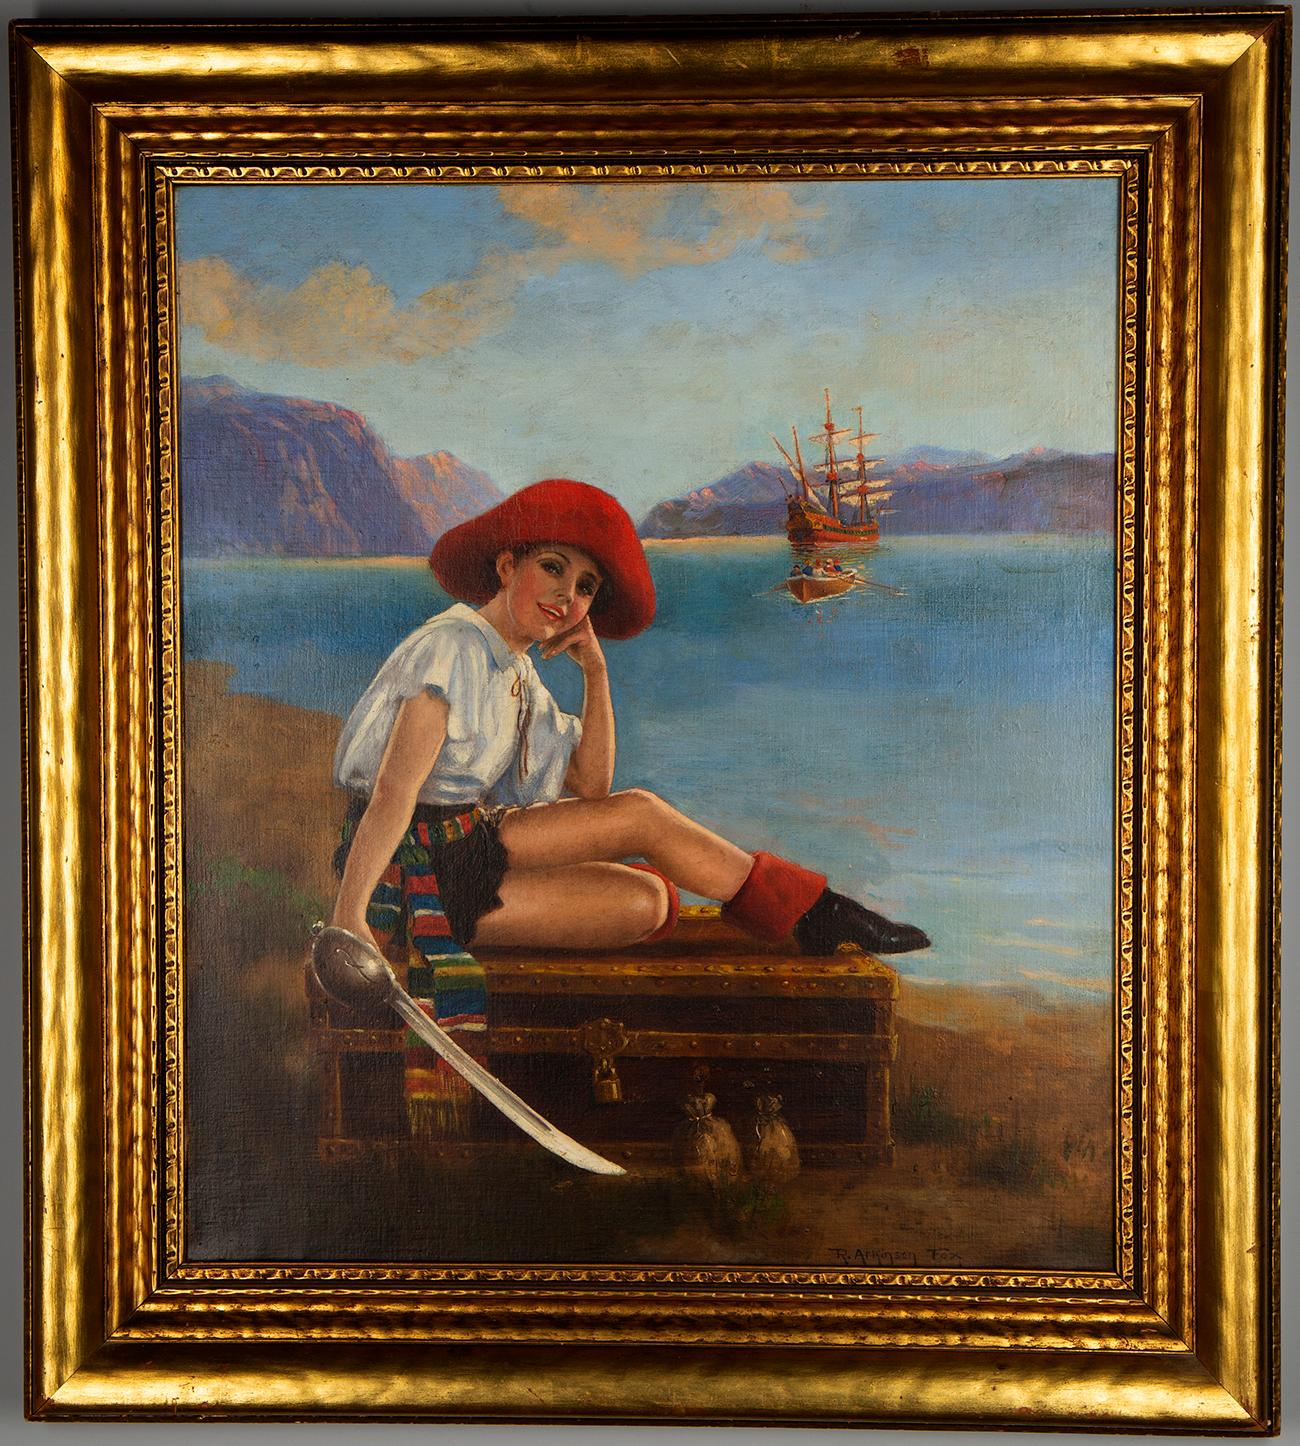 Robert Atkinson Fox Portrait Painting - Pirate Pin-Up Girl with Treasure Chest